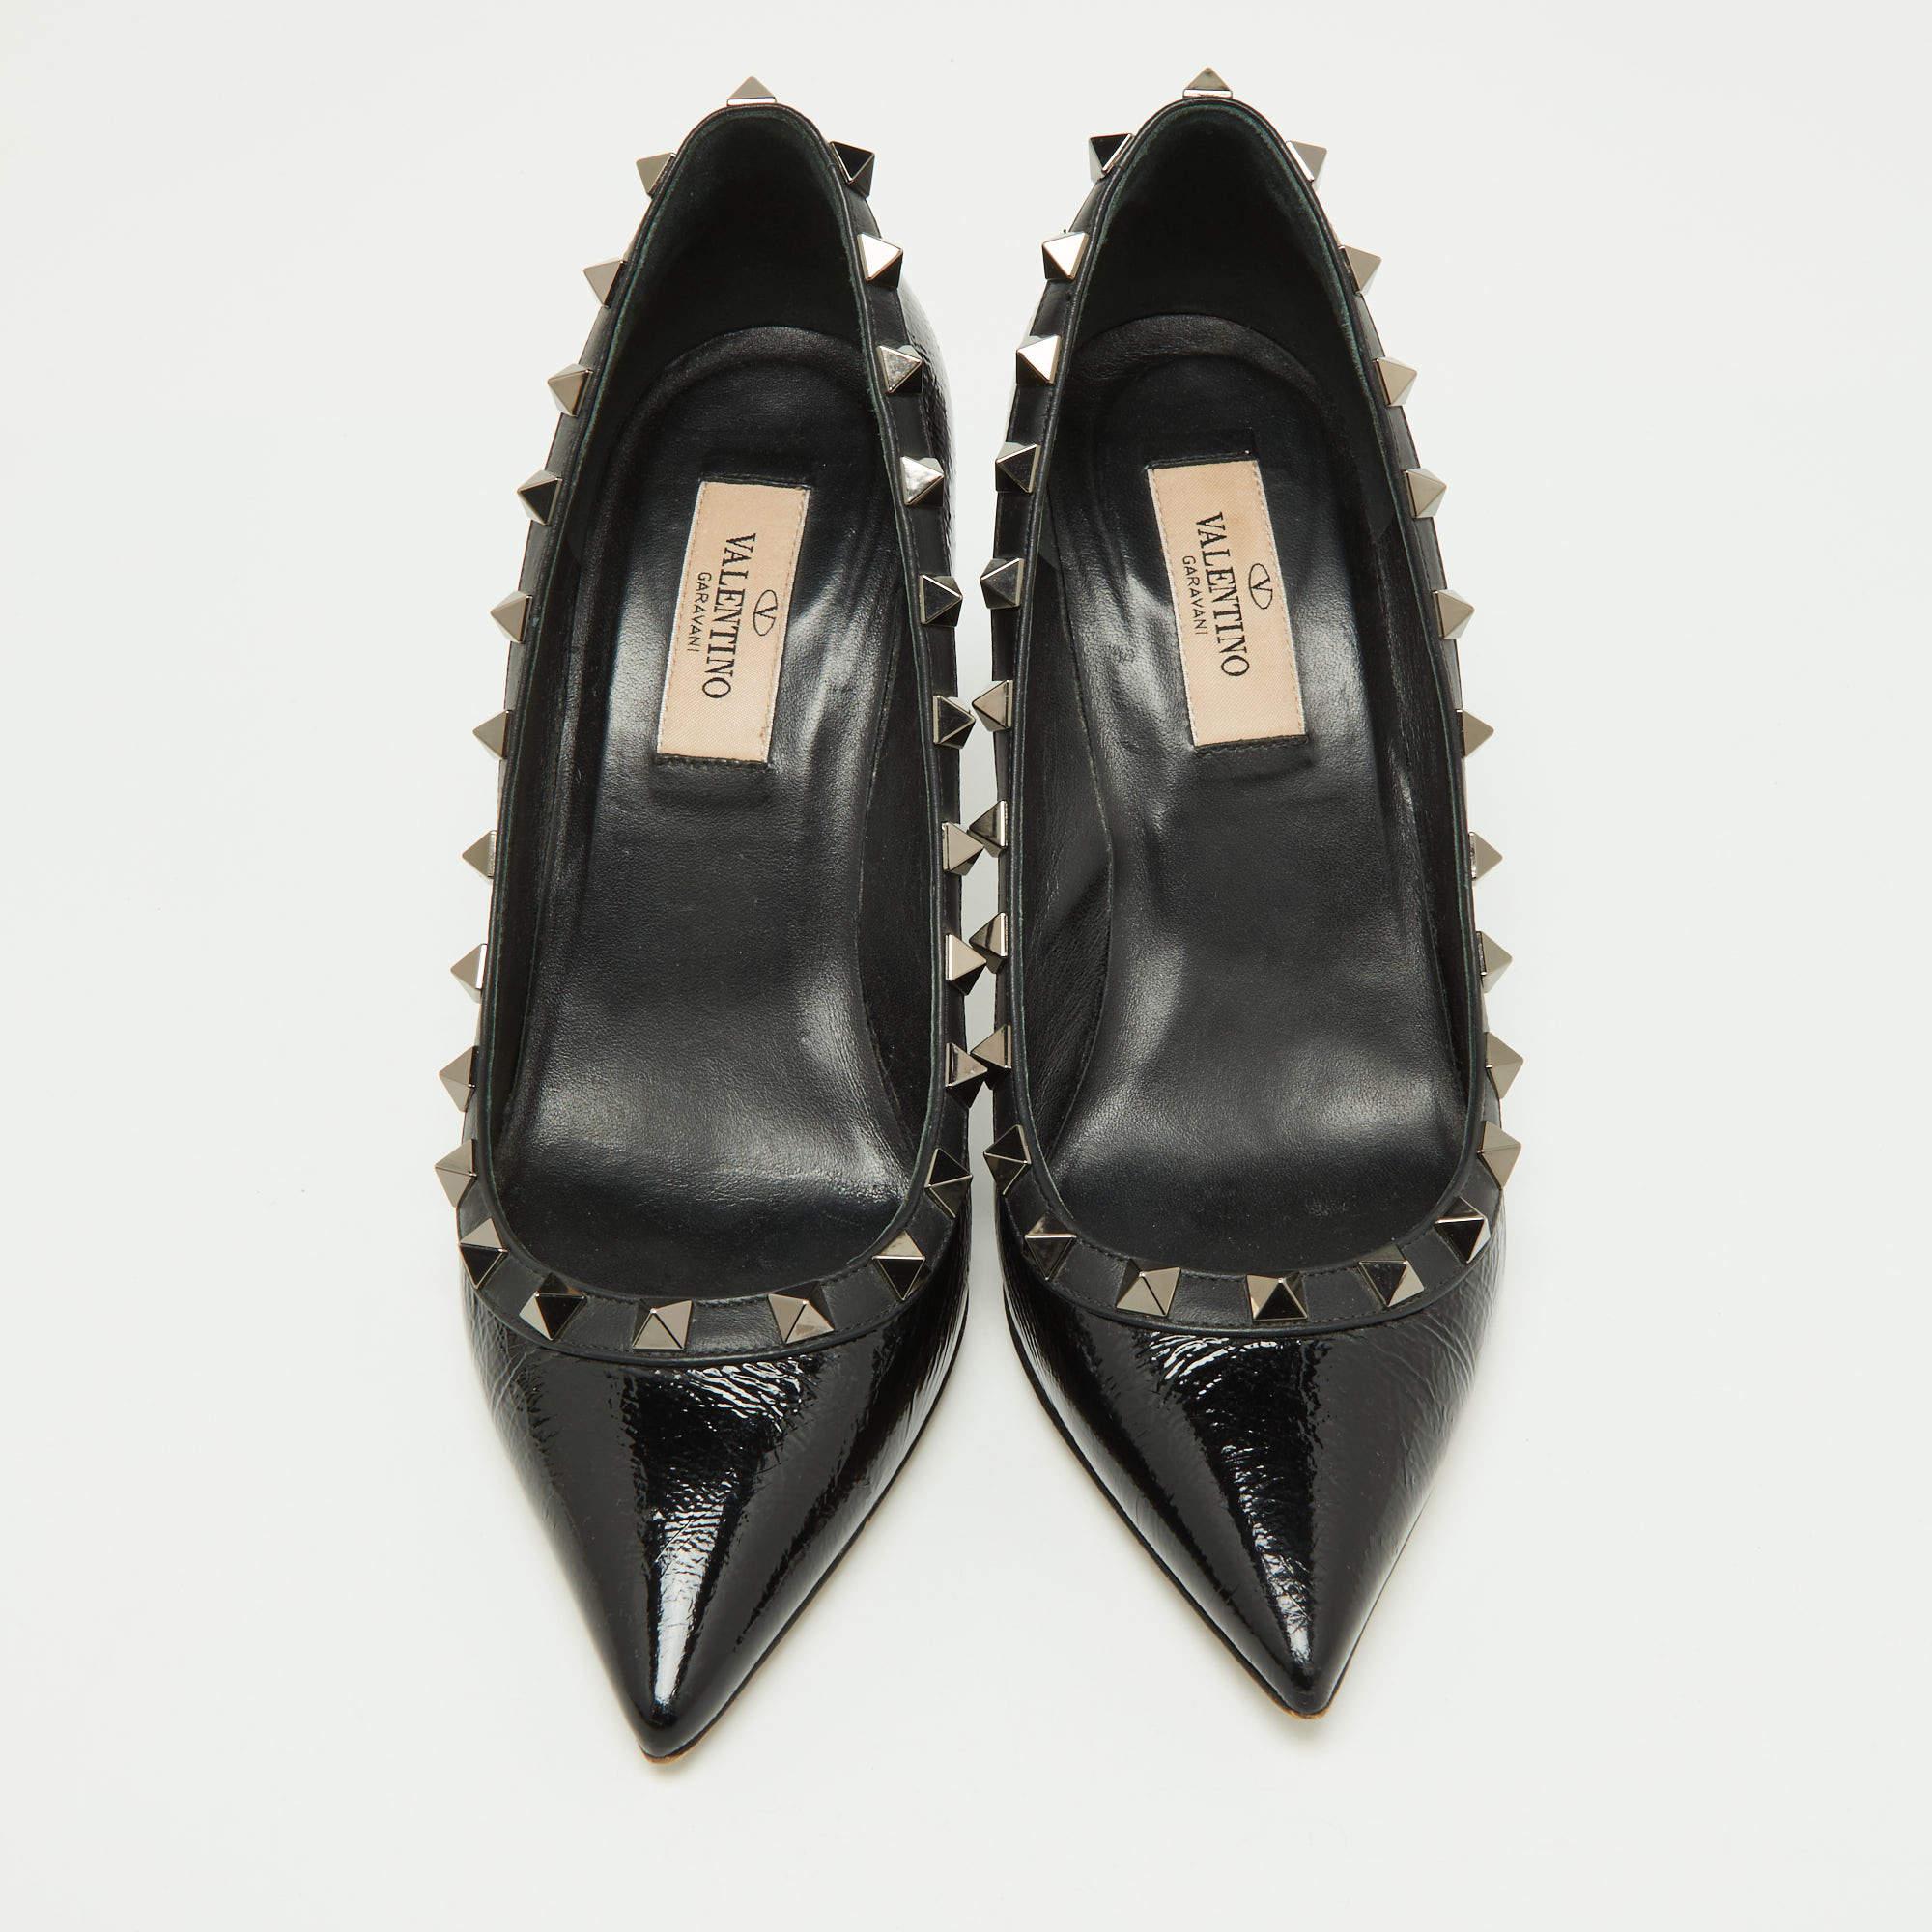 The fashion house’s tradition of excellence, coupled with modern design sensibilities, works to make these Valentino pumps a fabulous choice. They'll help you deliver a chic look with ease.

